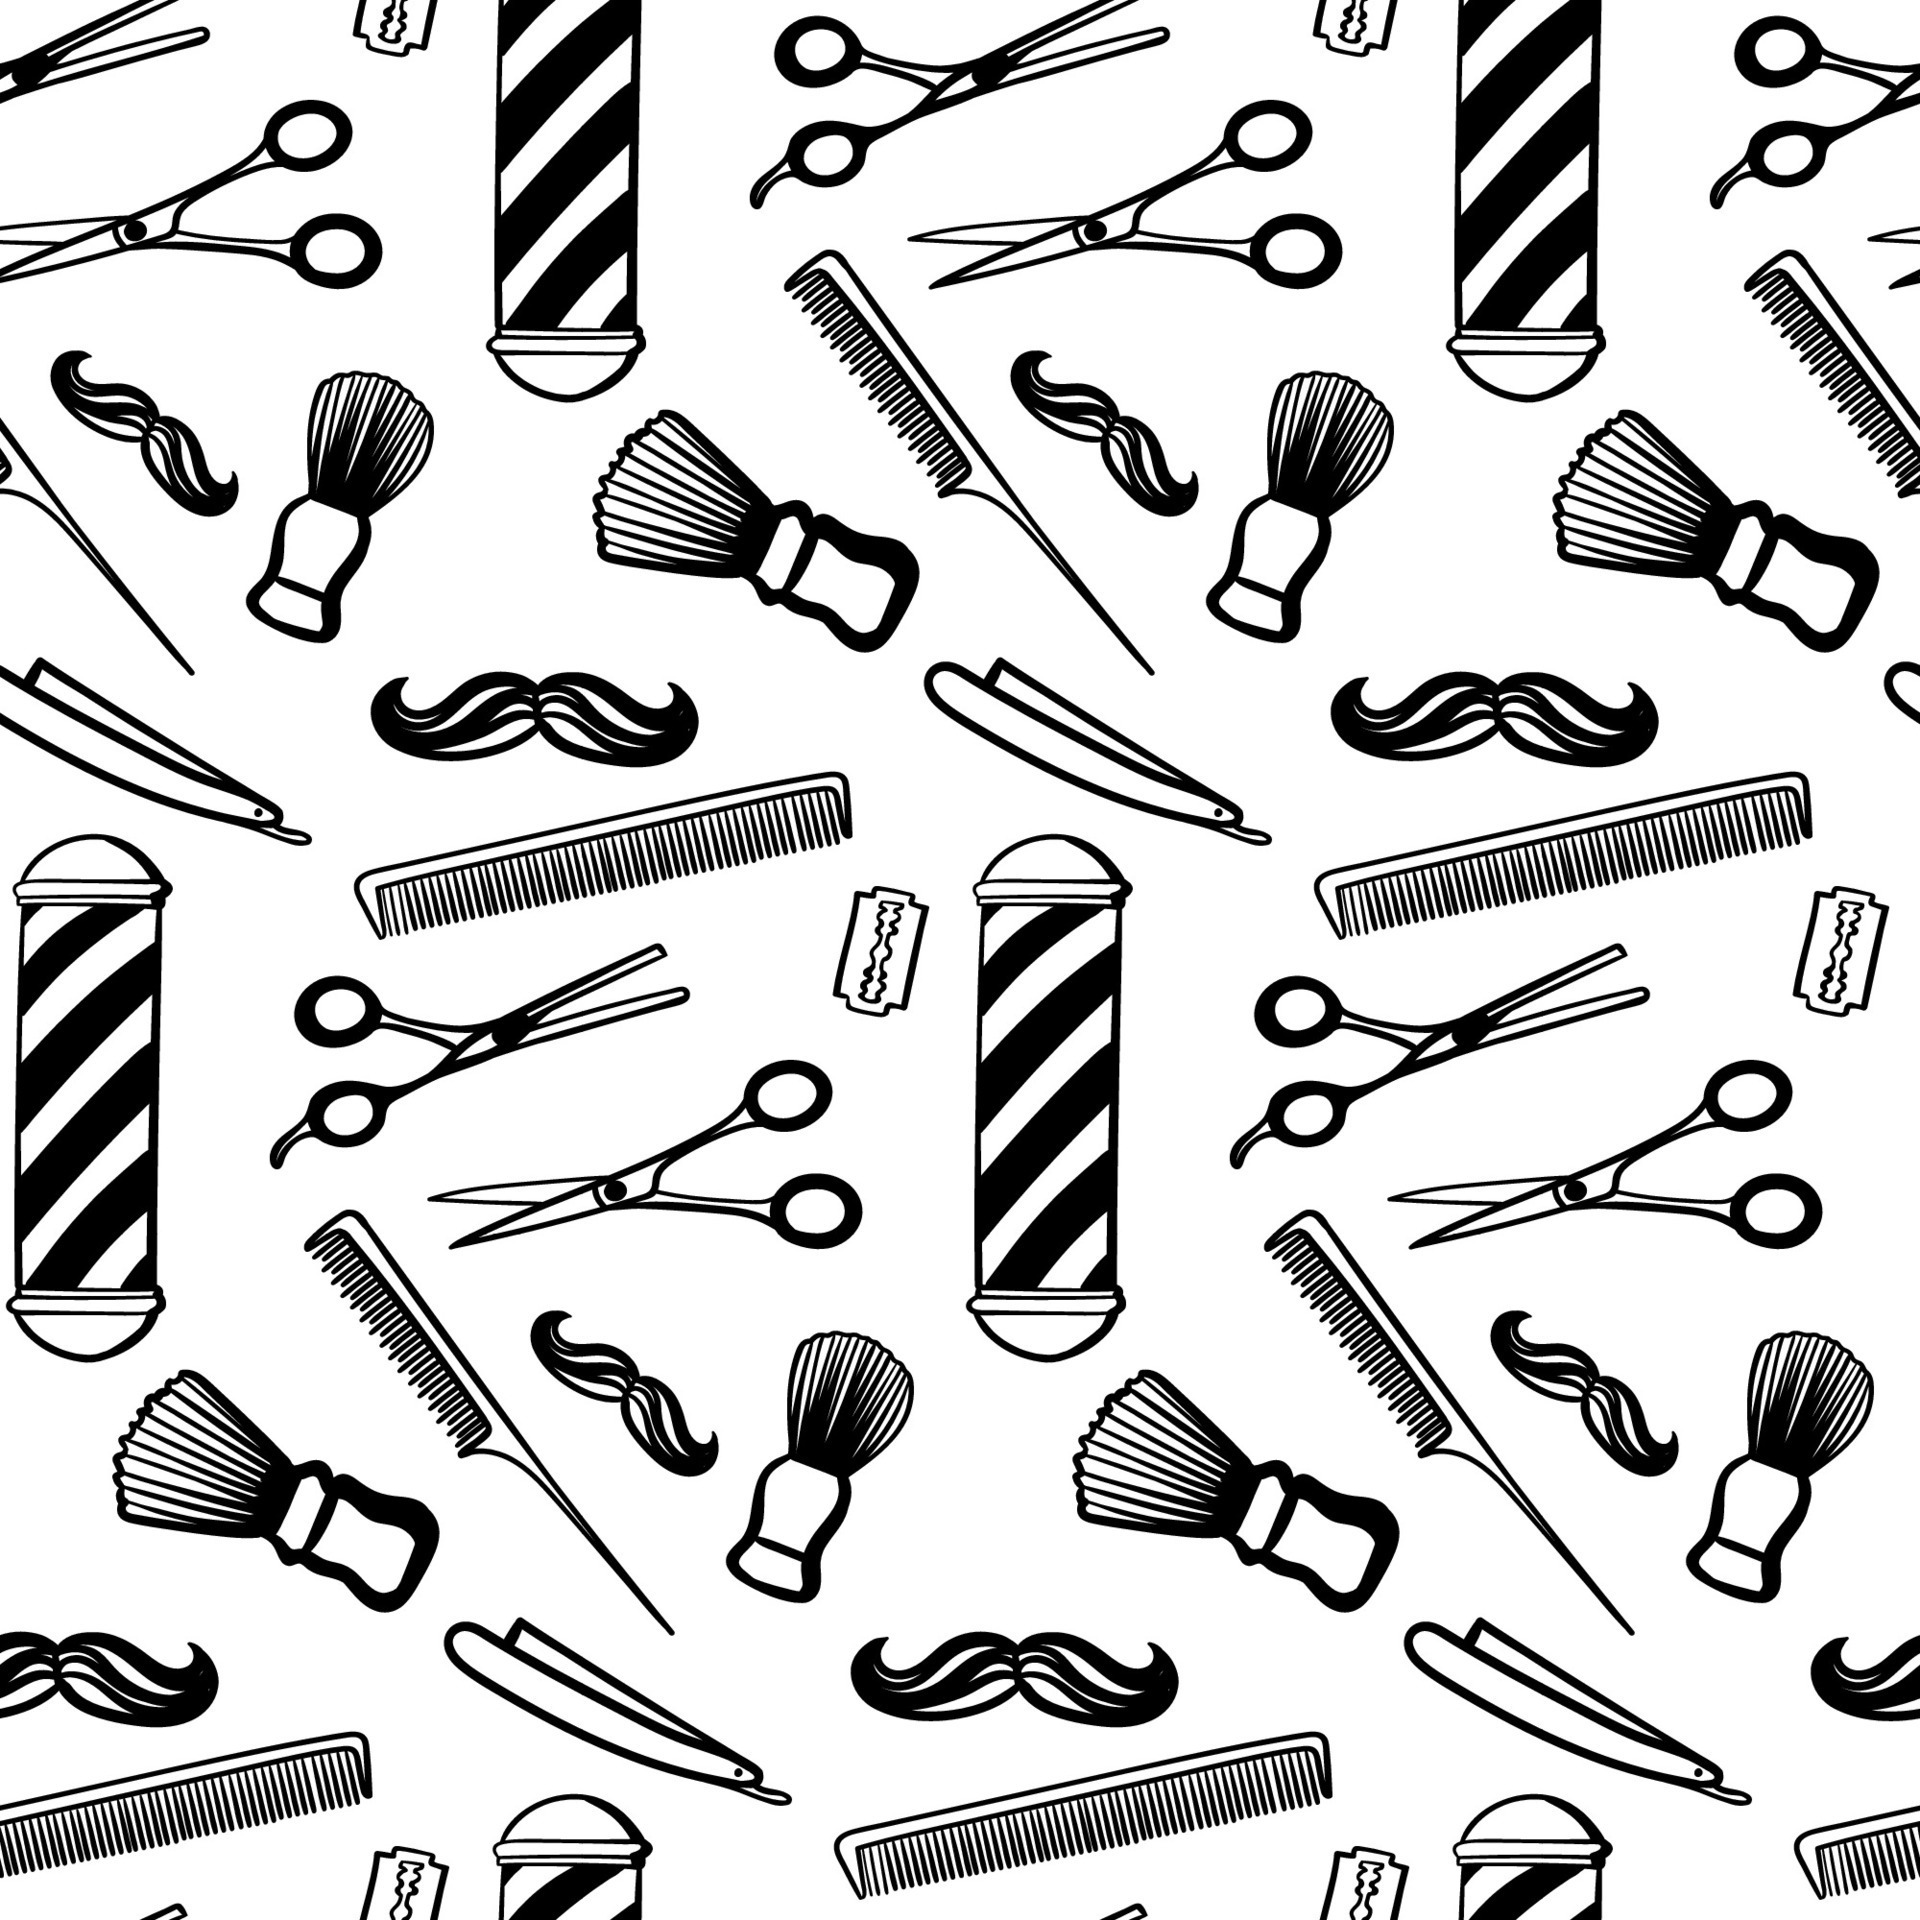 Premium Vector  A set of accessories and tools for a hairdressing salon  barbershop